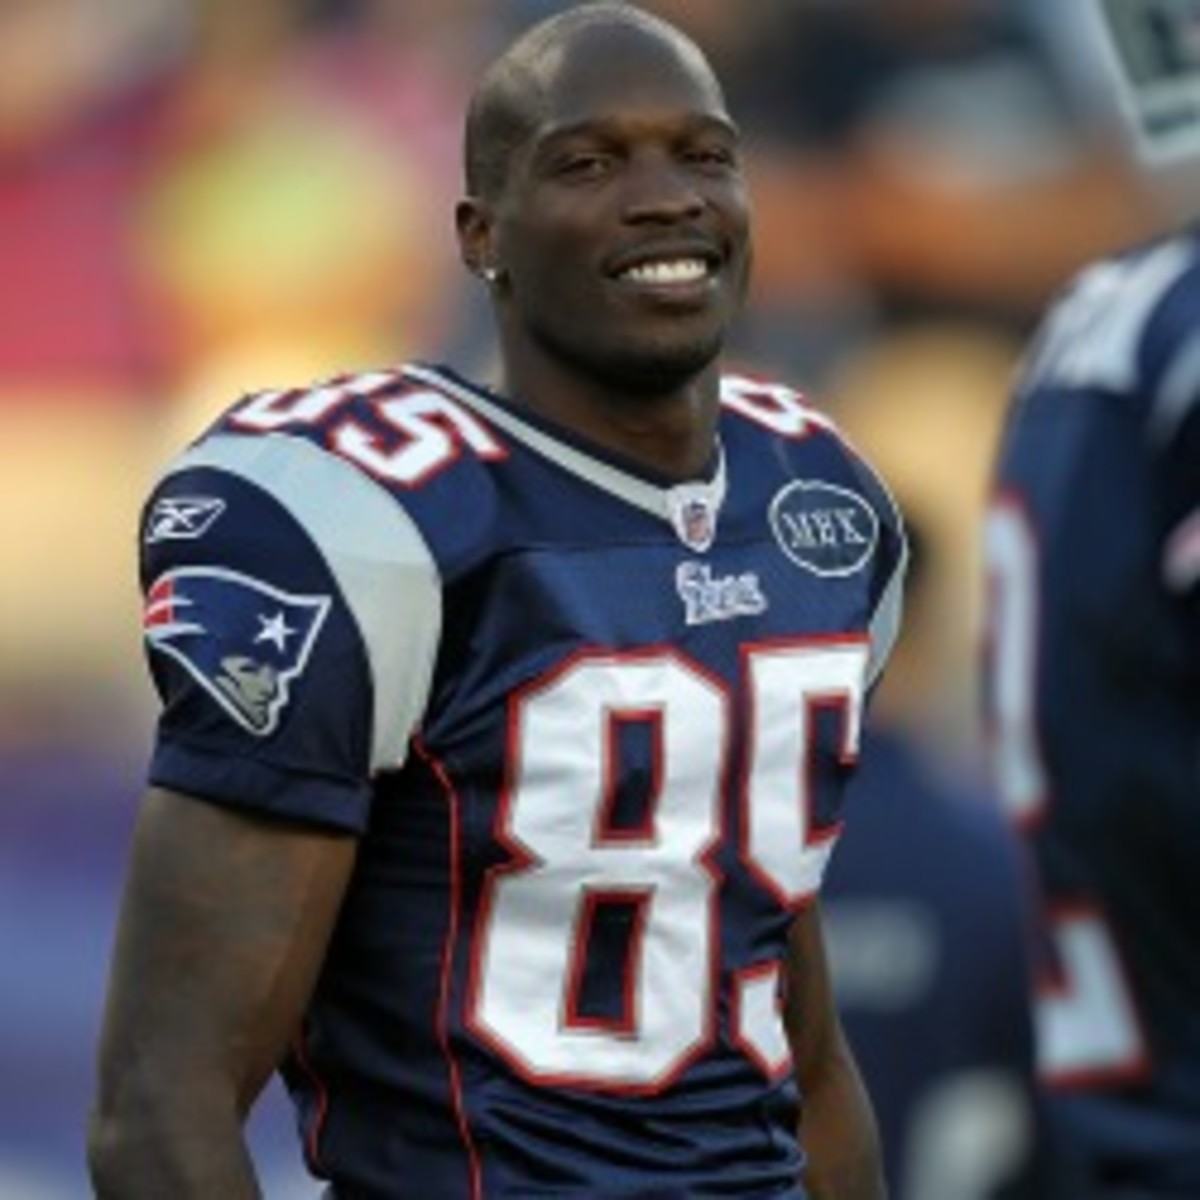 Chad Johnson, who last played for the Patriots in 2011, was cut by the Dolphins after being arrested in August. (Jim Rogash/Getty Images)